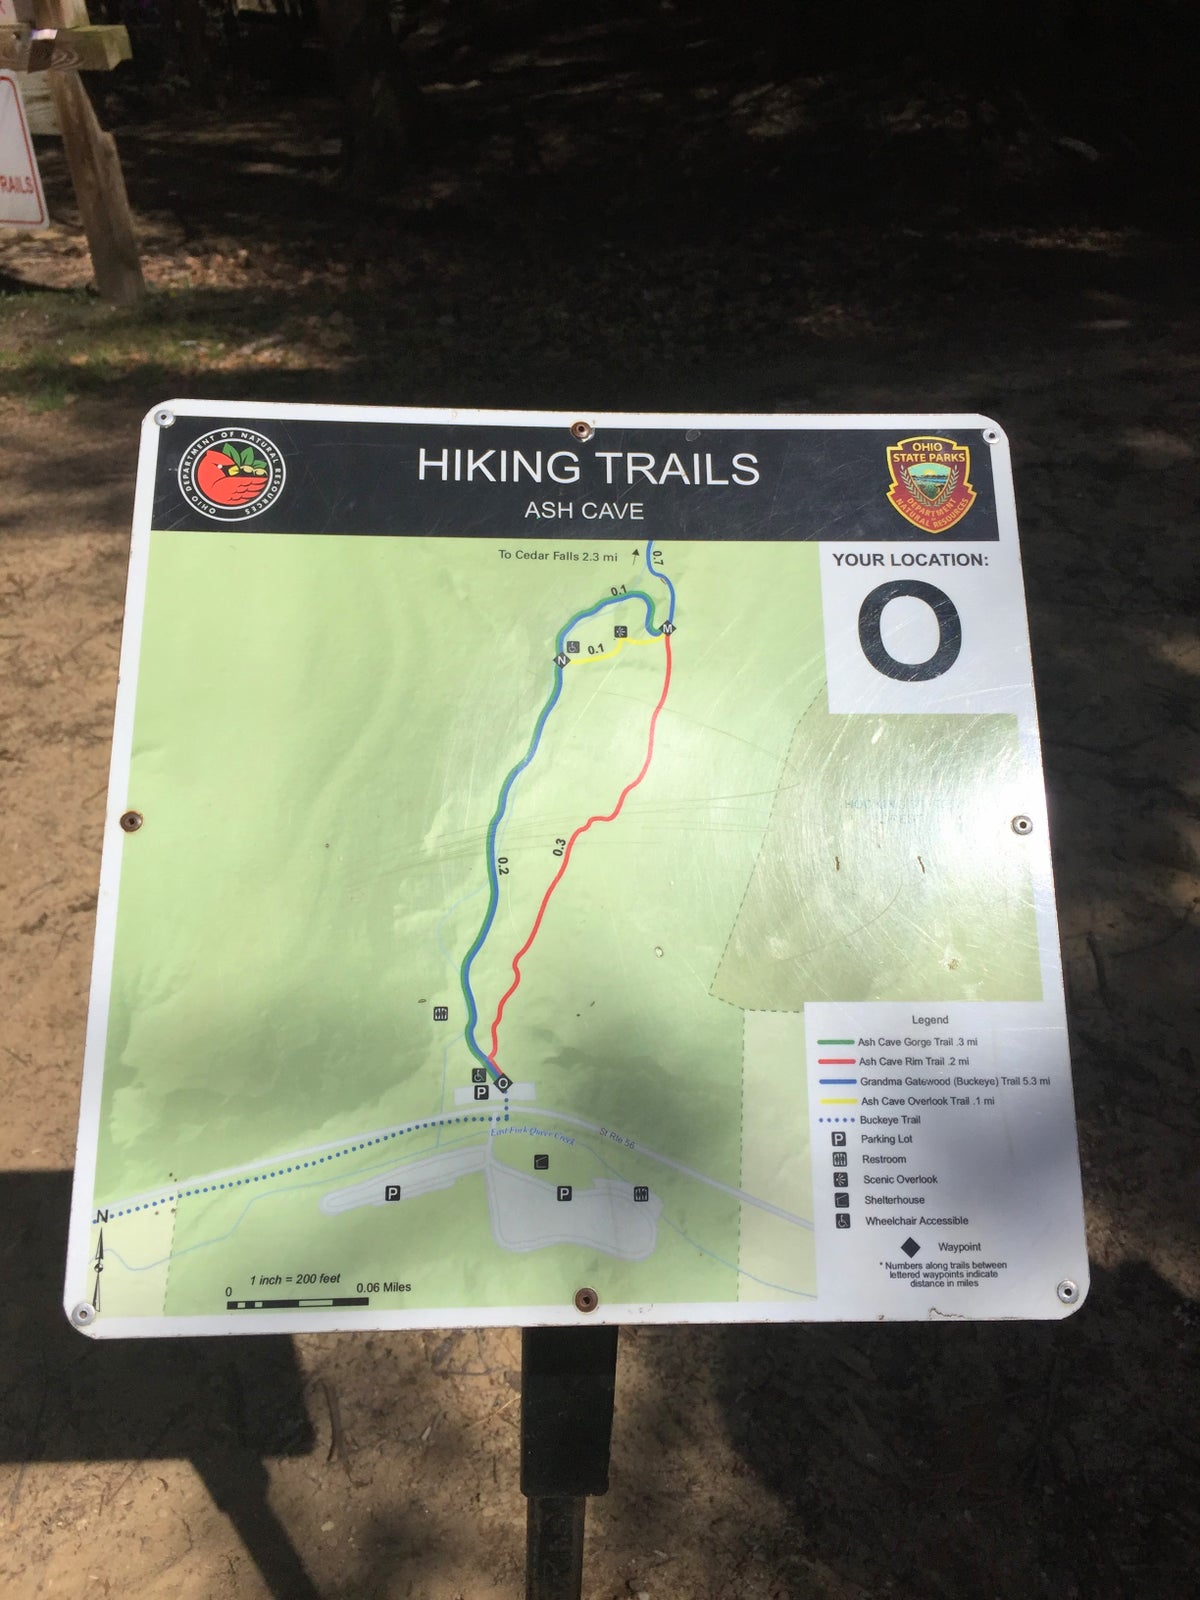 Ash Cave Trail Map at Hocking Hills